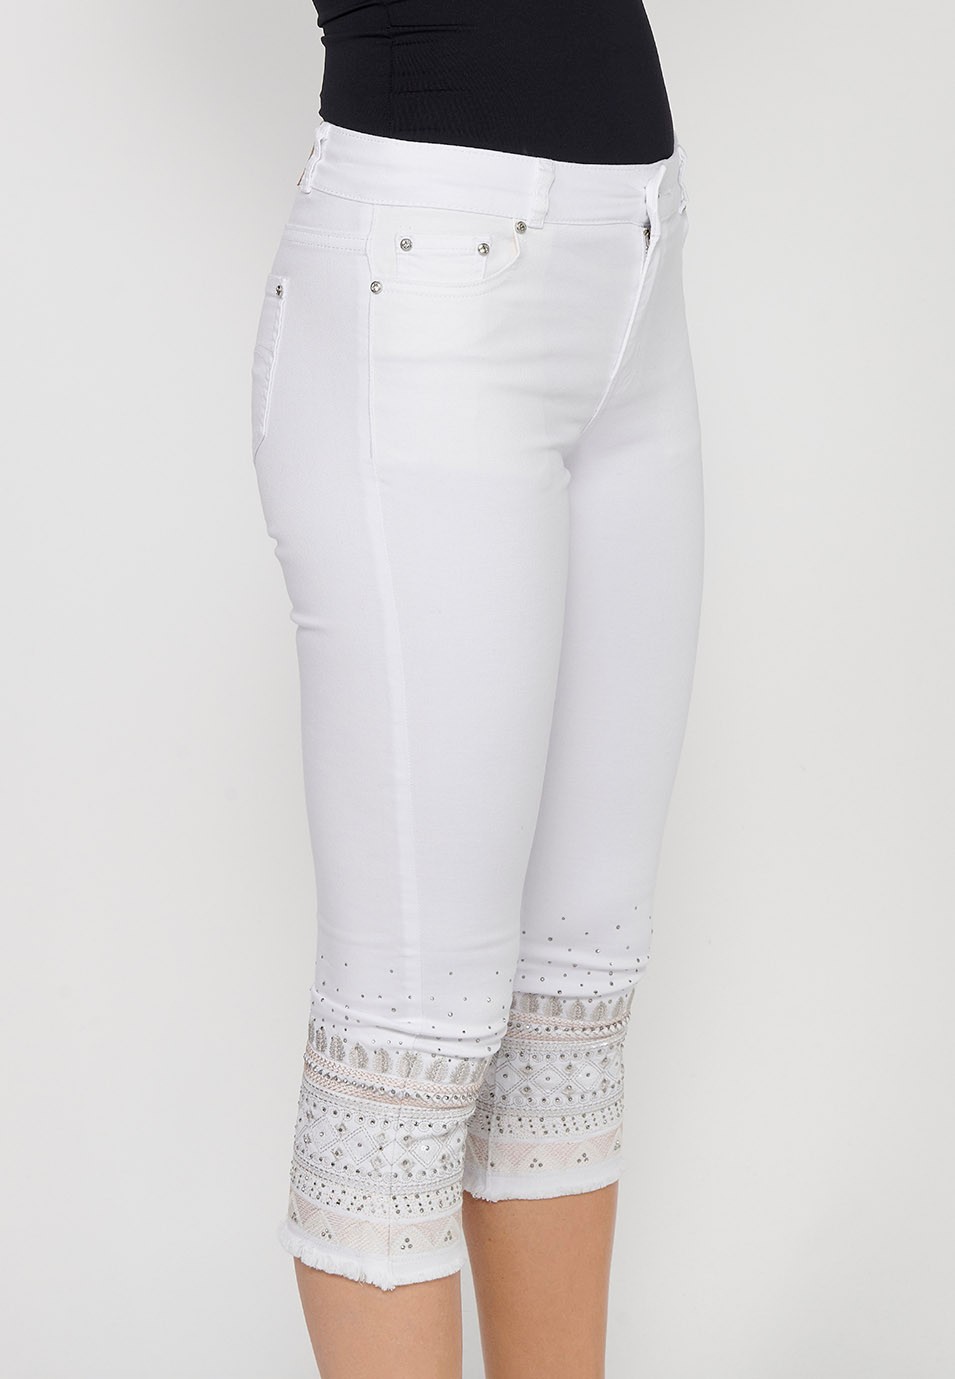 Pirate pants finished with floral embroidery and front closure with zipper and button in White for Women 8